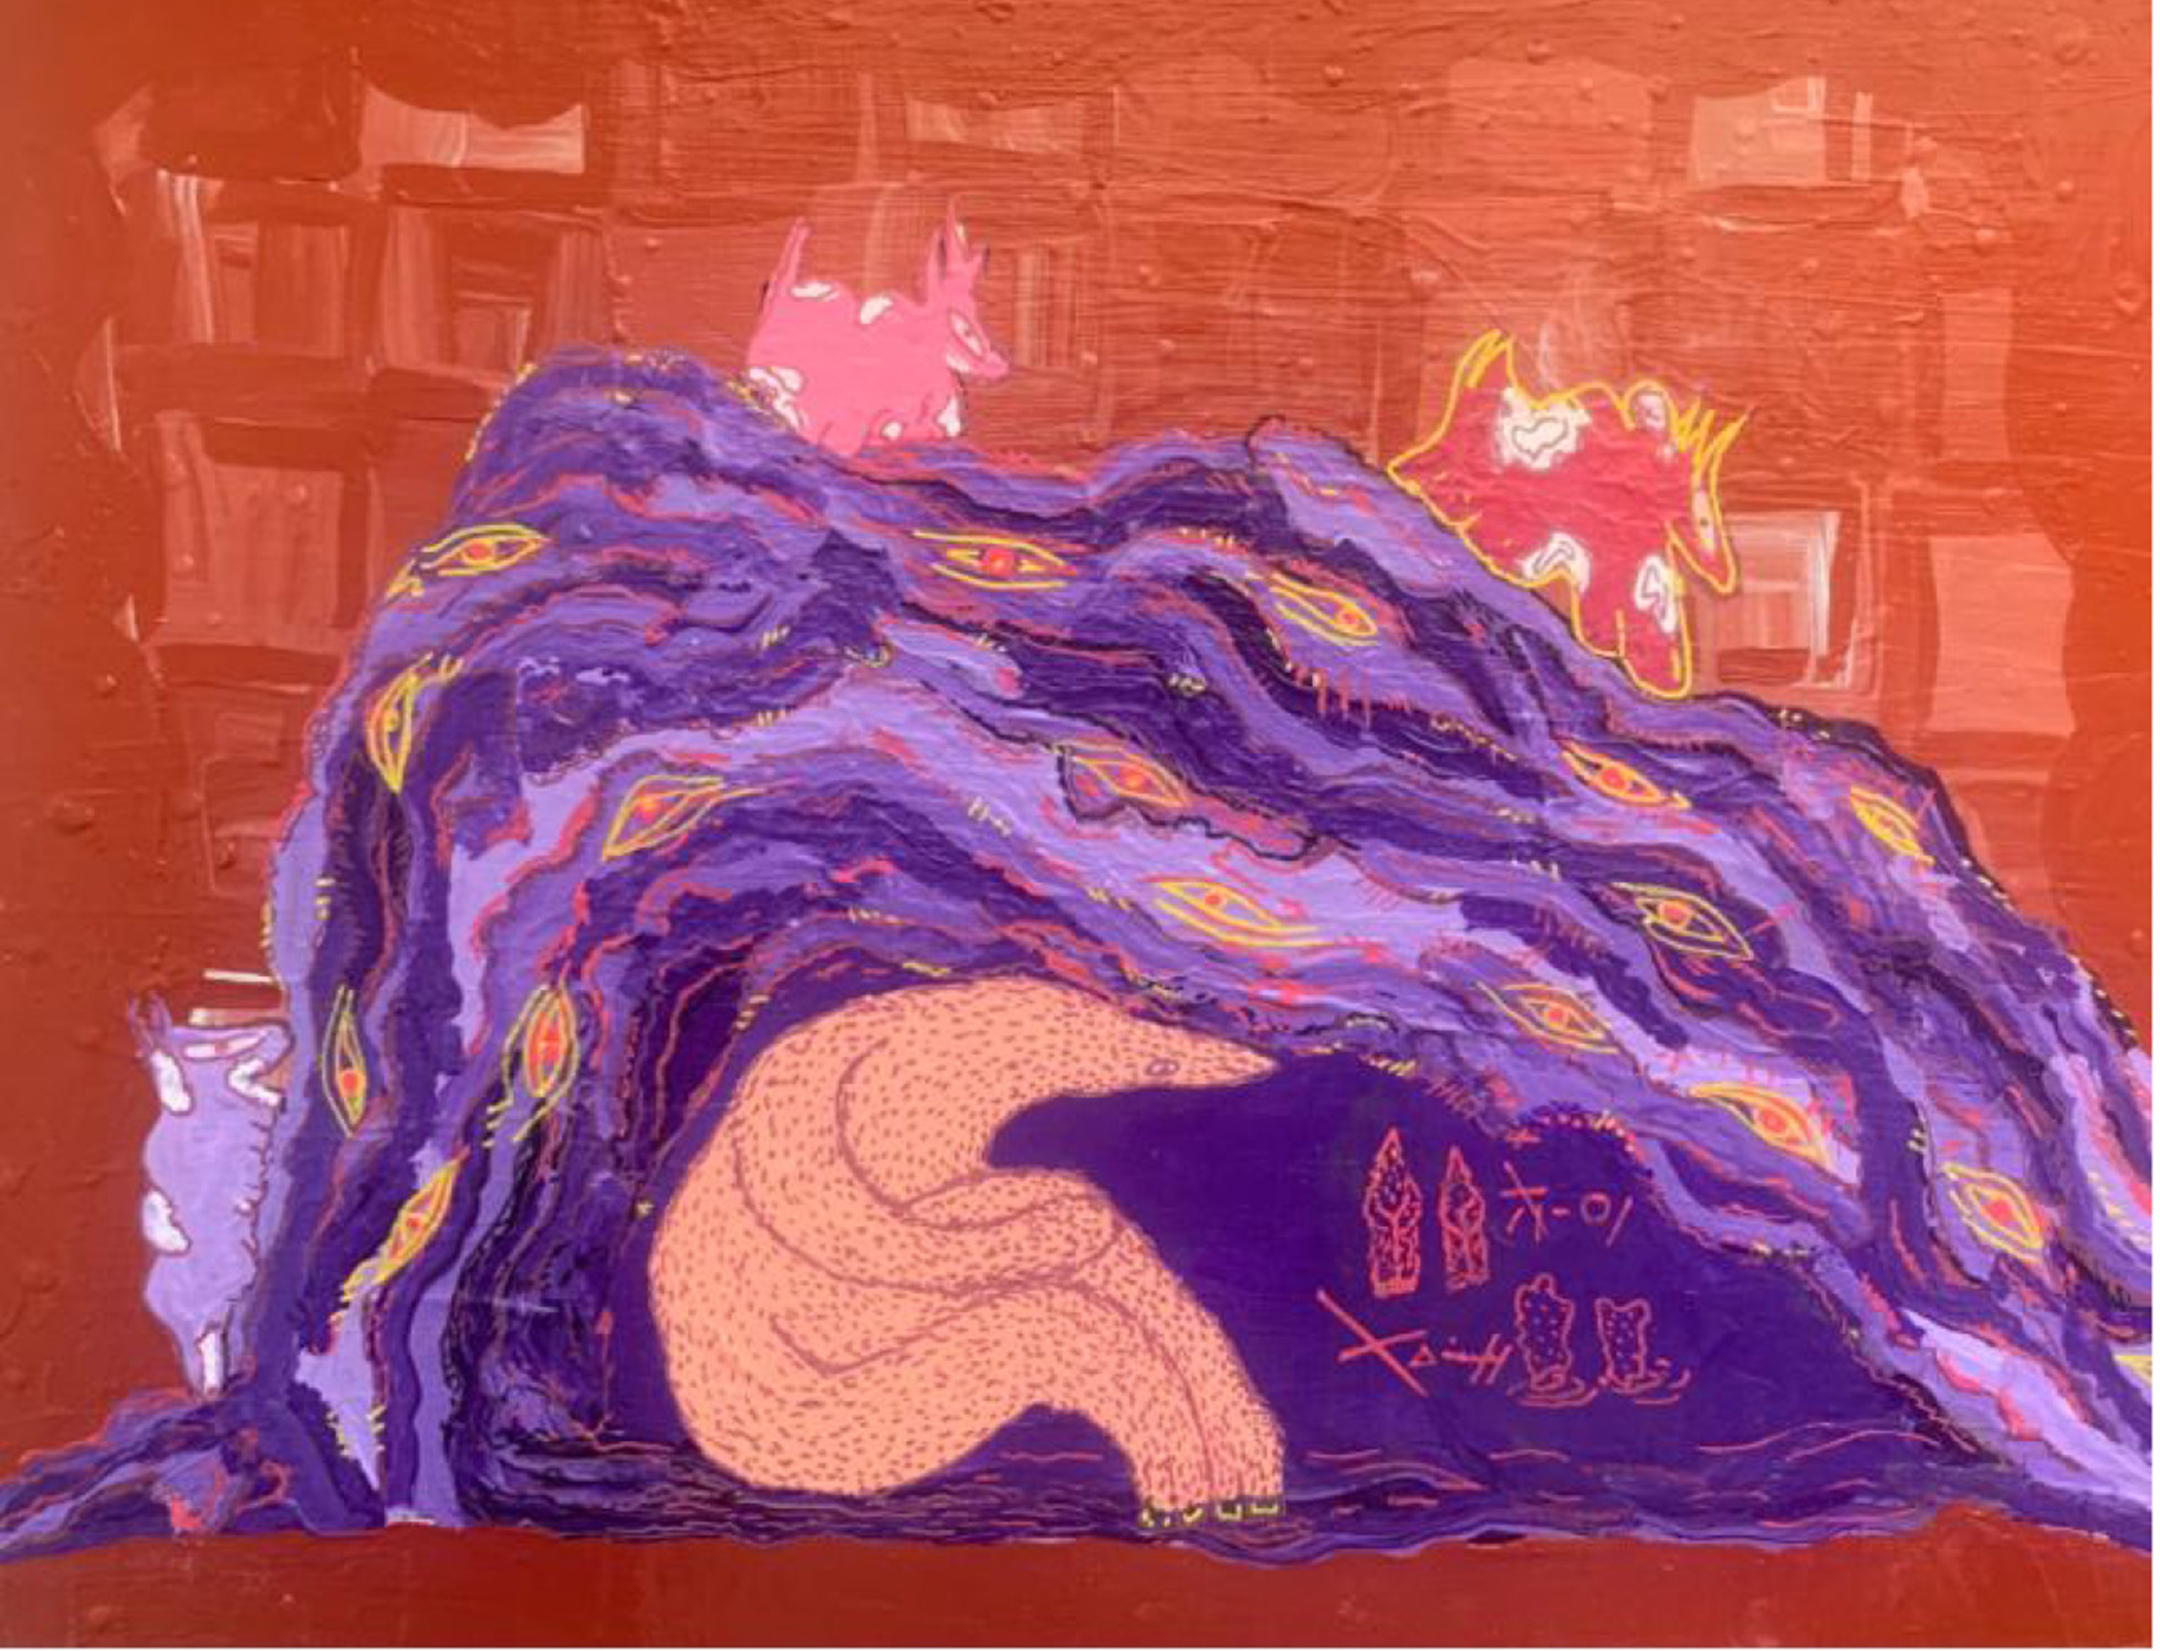 Painting of angular alien in peach and pink huddled under a pink shell against an orange background